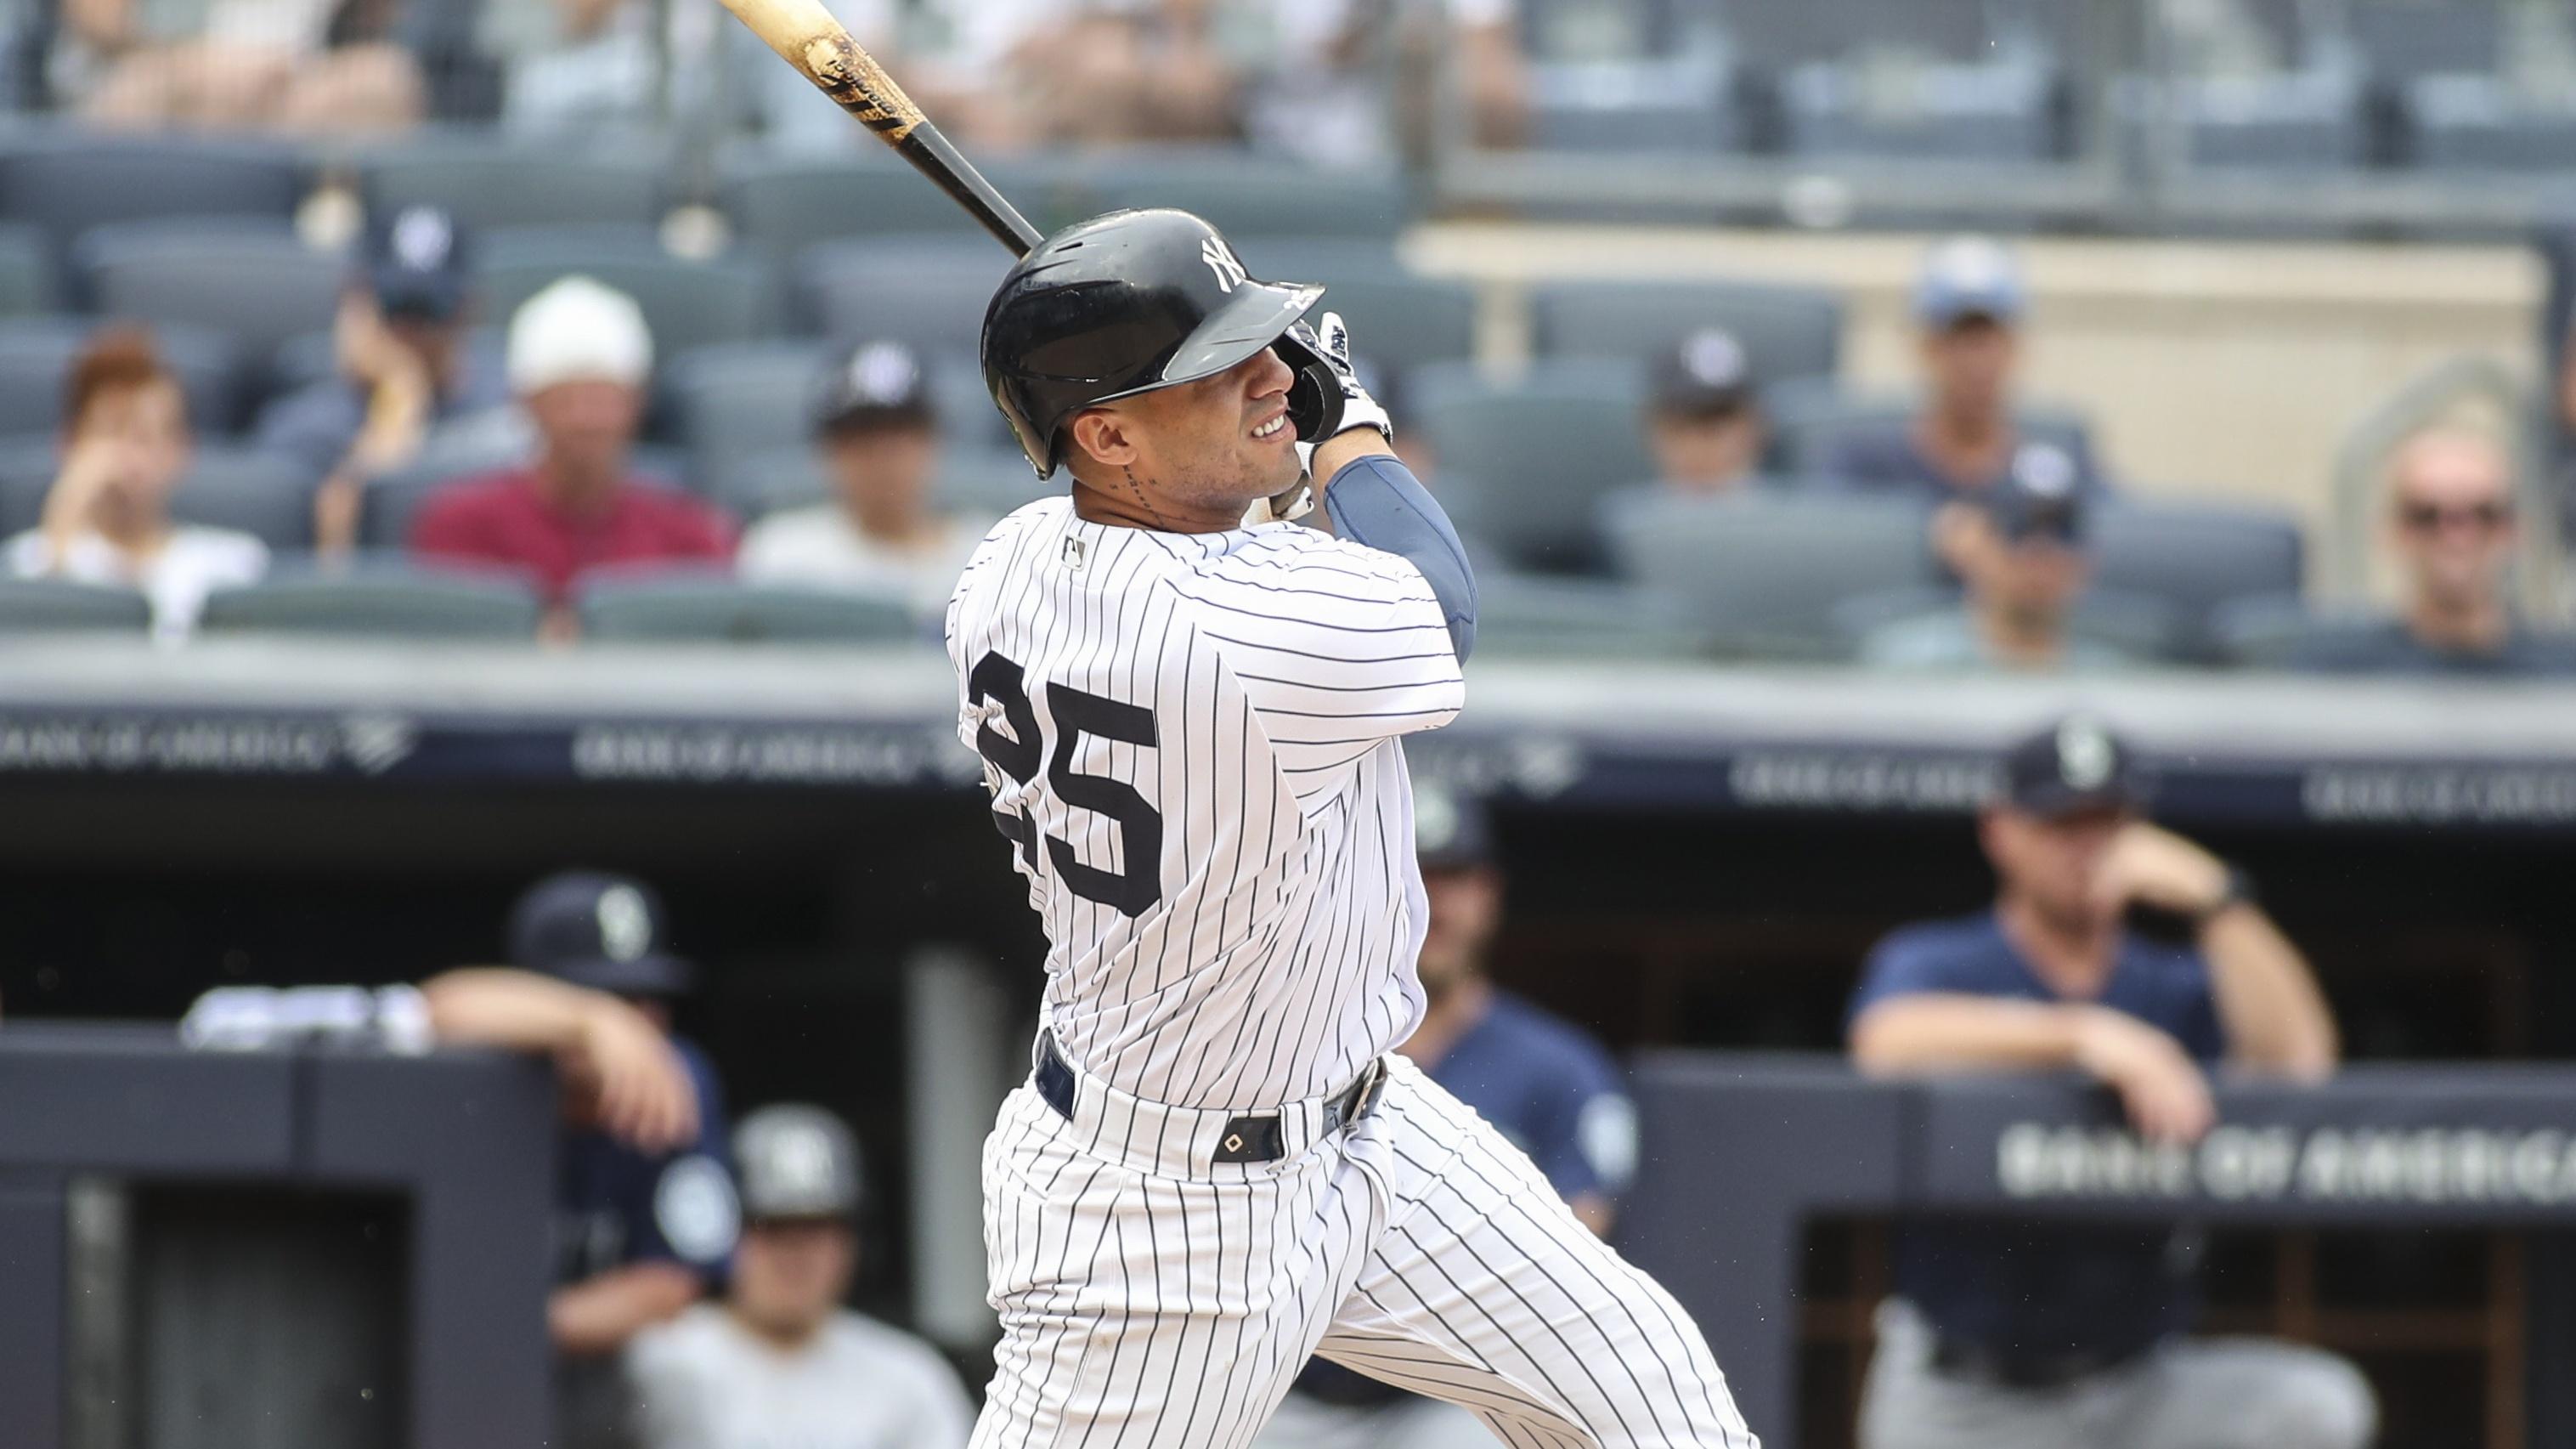 Aug 8, 2021; Bronx, New York, USA; New York Yankees shortstop Gleyber Torres (25) hits a single in the fourth inning against the Seattle Mariners at Yankee Stadium. / © Wendell Cruz-USA TODAY Sports